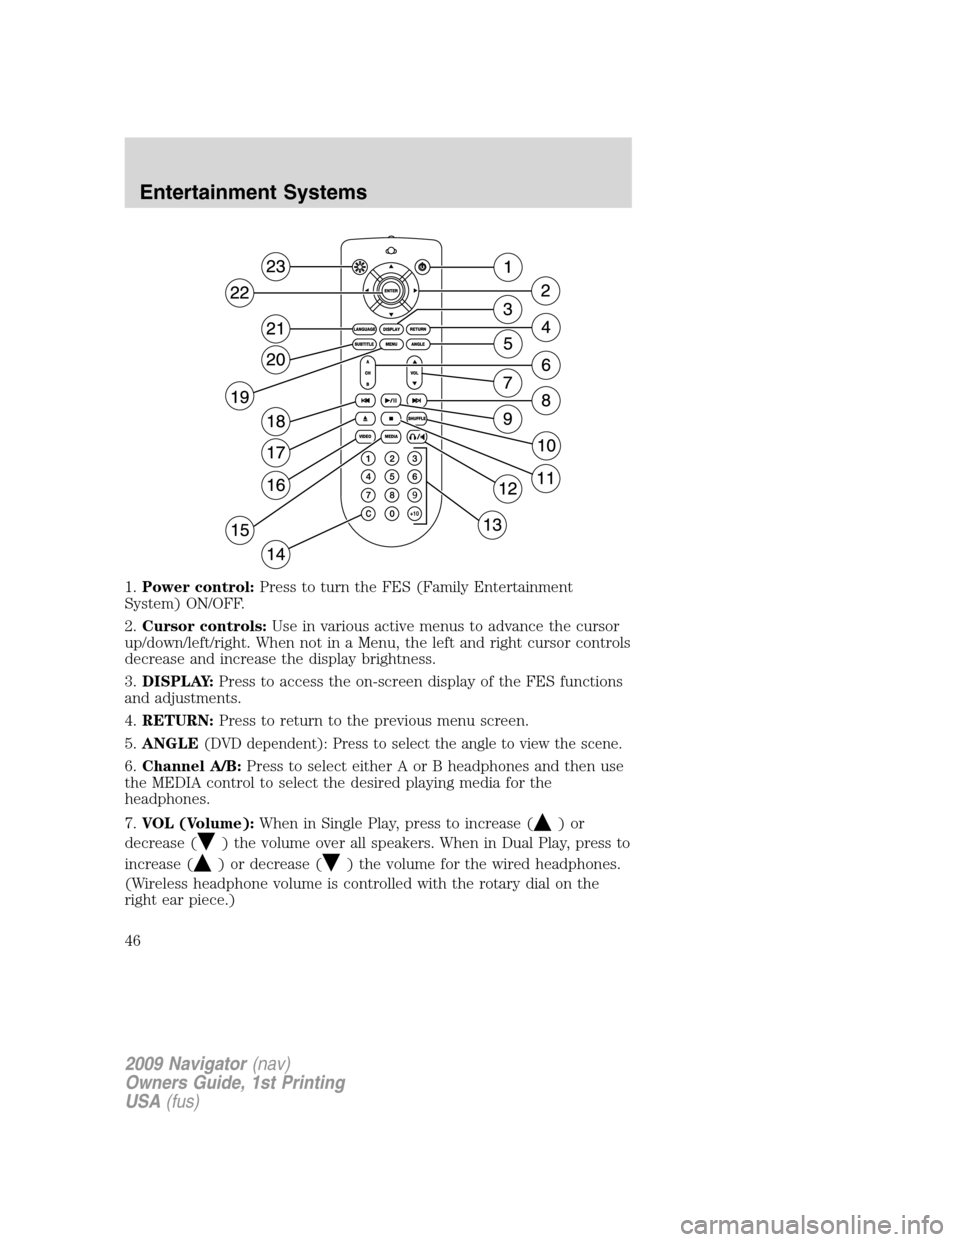 LINCOLN NAVIGATOR 2009 Service Manual 1.Power control:Press to turn the FES (Family Entertainment
System) ON/OFF.
2.Cursor controls:Use in various active menus to advance the cursor
up/down/left/right. When not in a Menu, the left and rig